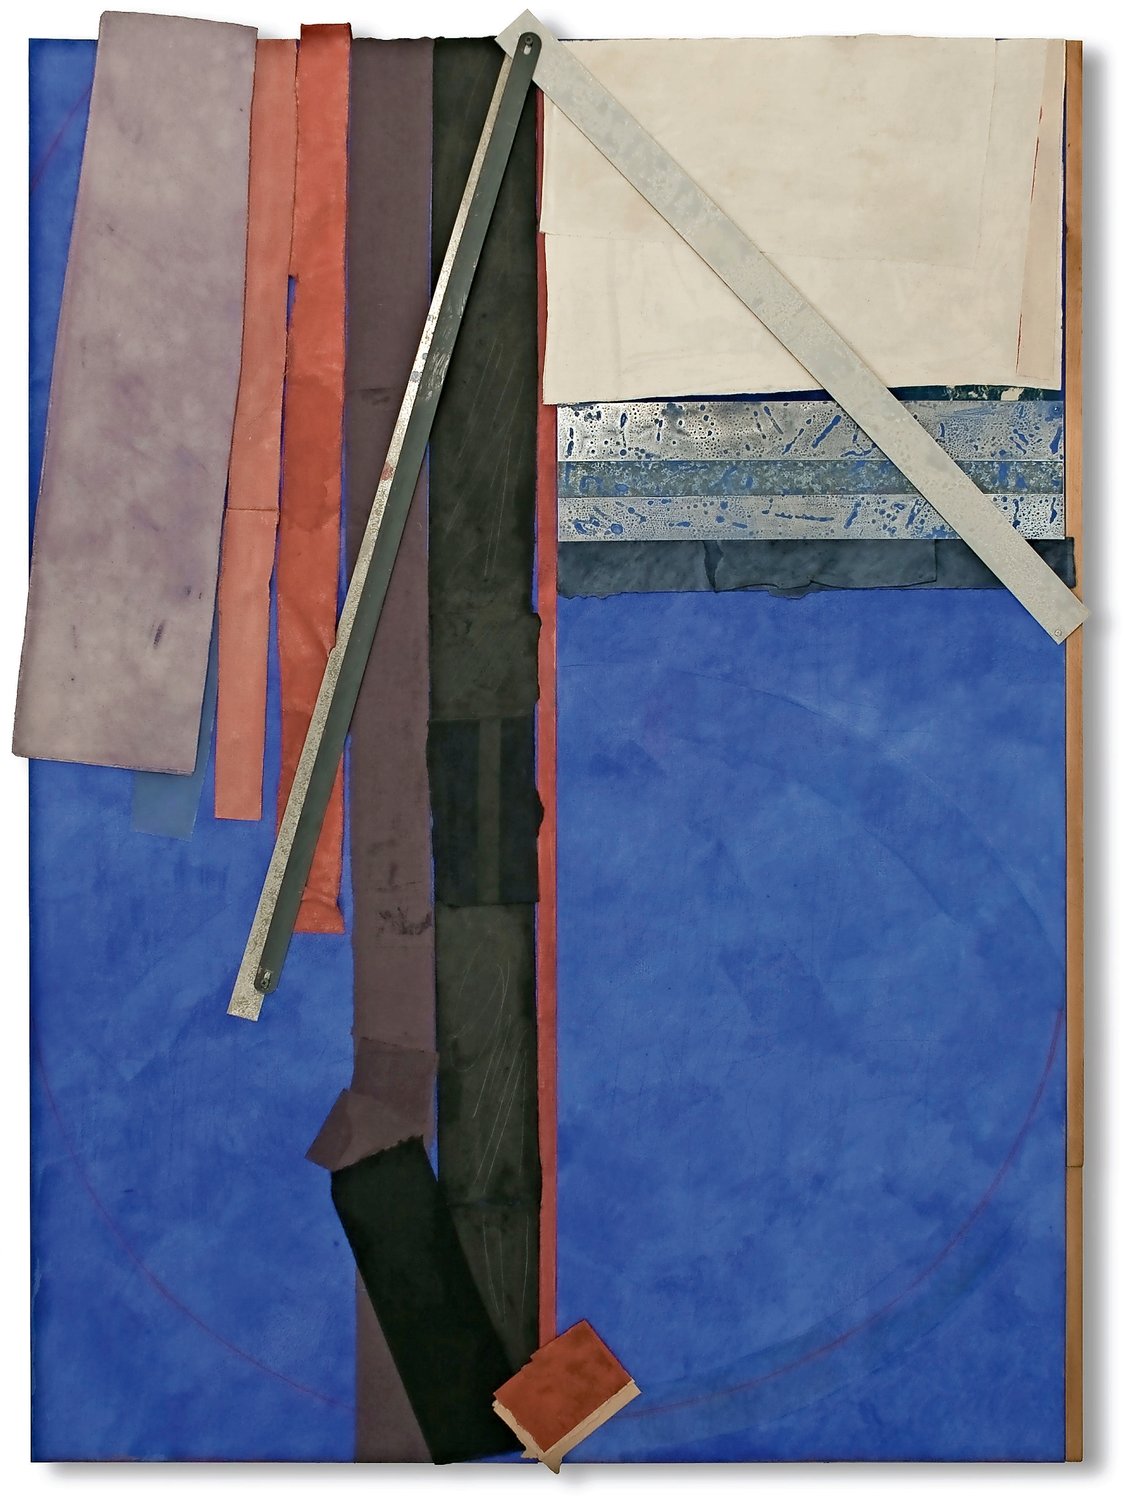 Bruce Dorfman's 'Windsock' is one of 23 works on display at the Gallery of the American Fine Arts Society through Nov. 15.